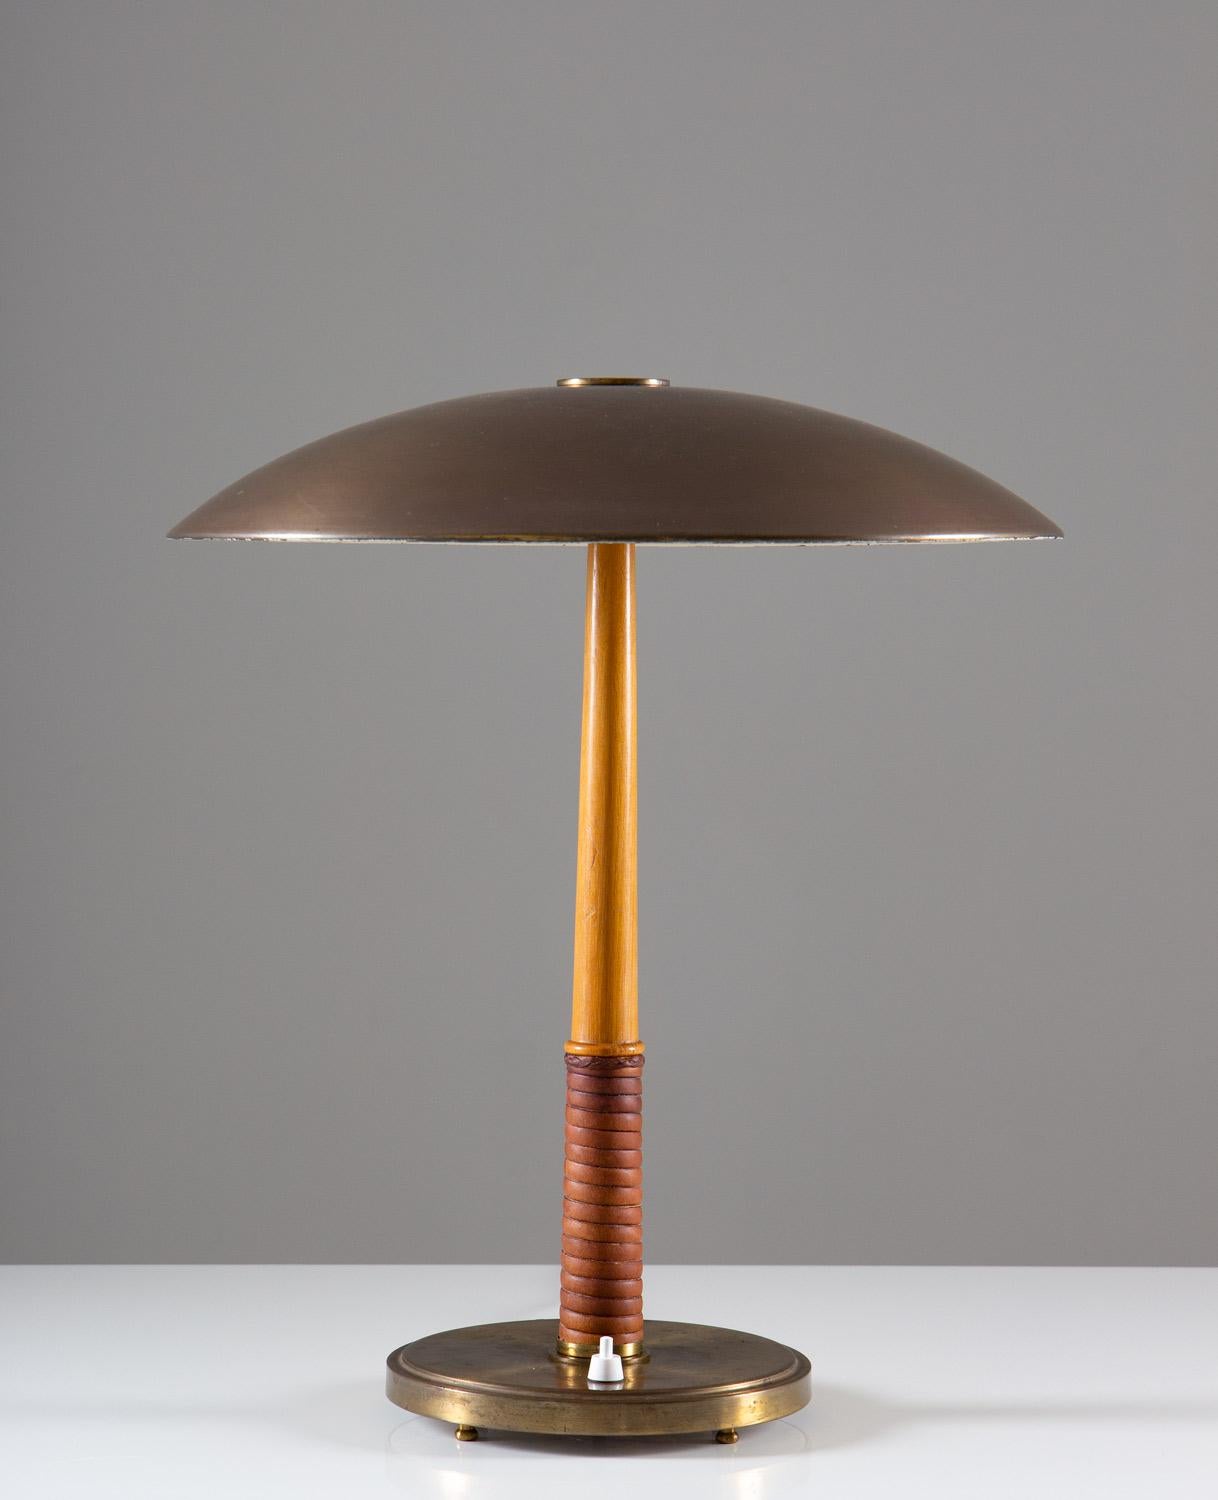 Rare table lamp in brass, leather and wood, by Böhlmarks, Sweden.
This elegant lamp was manufactured during the Swedish Modern era and is of very high quality. It consists of a heavy brass foot, holding a leather webbed wooden base. The shade is